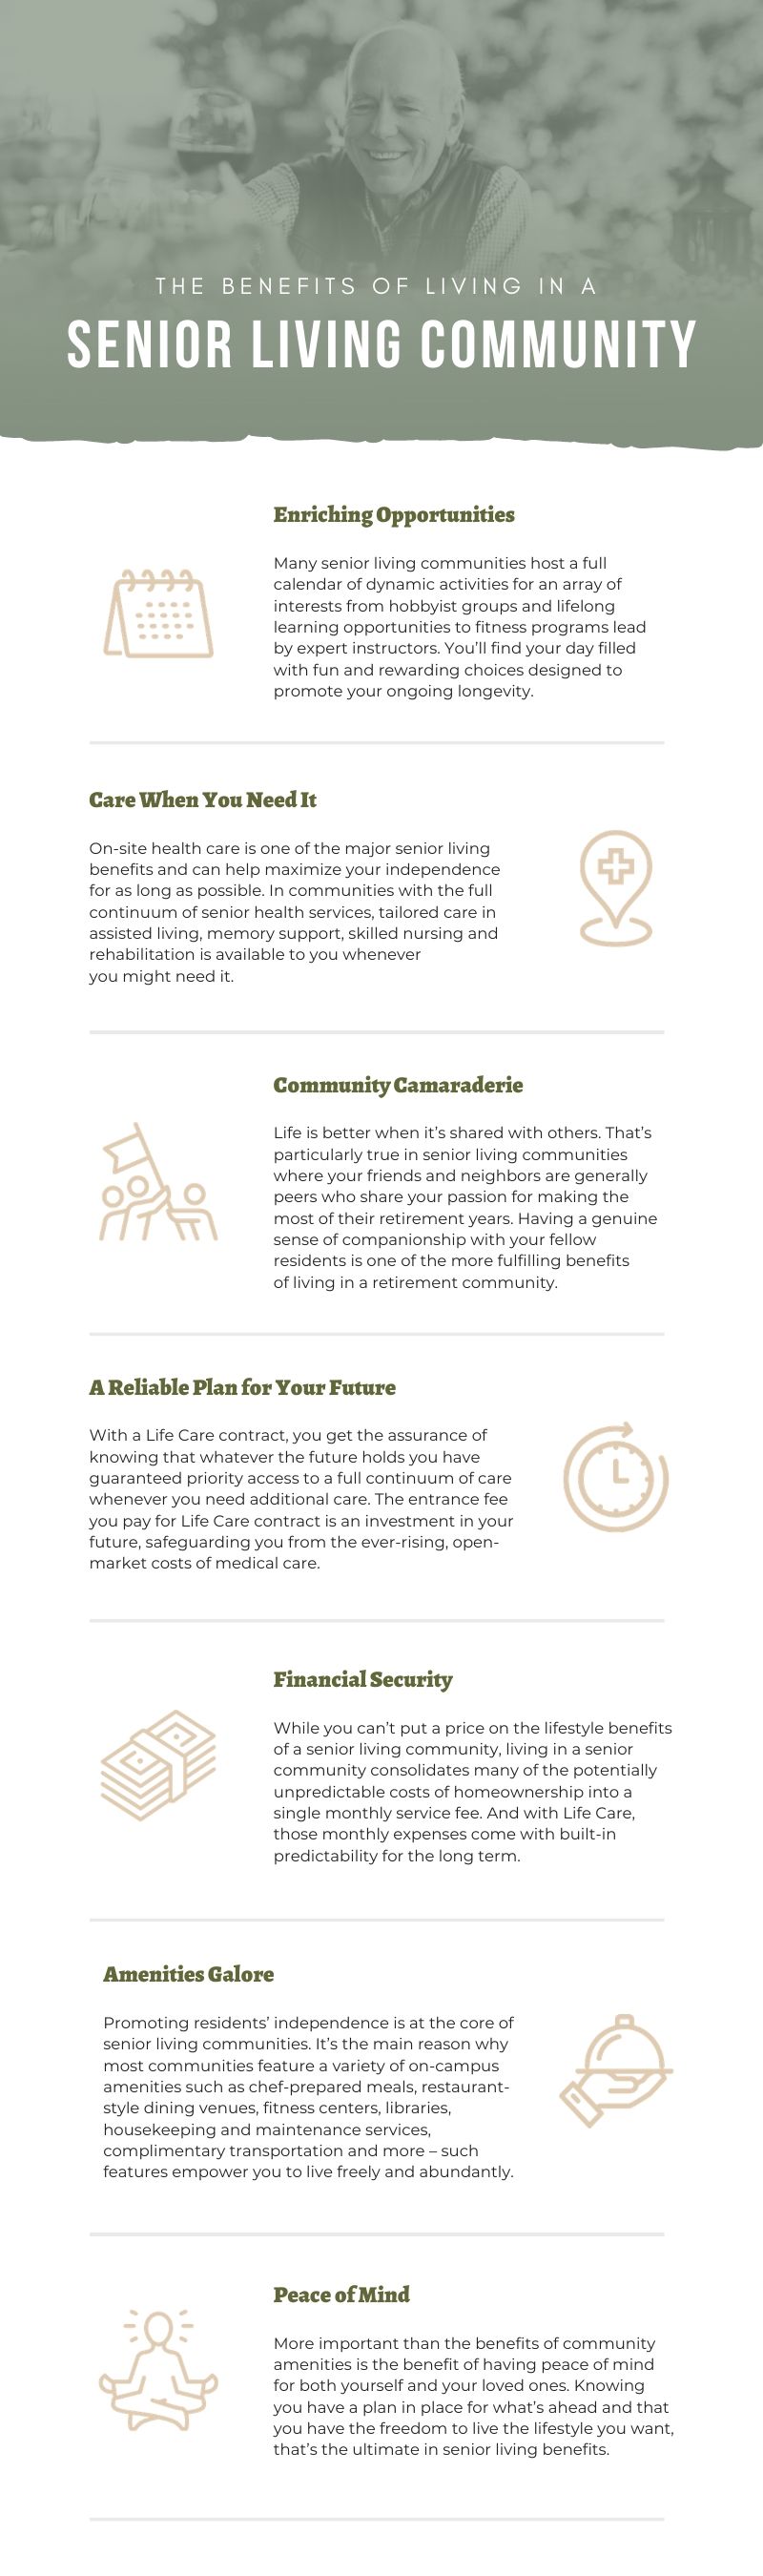 an infographic explaining the benefits of living in a senior living community